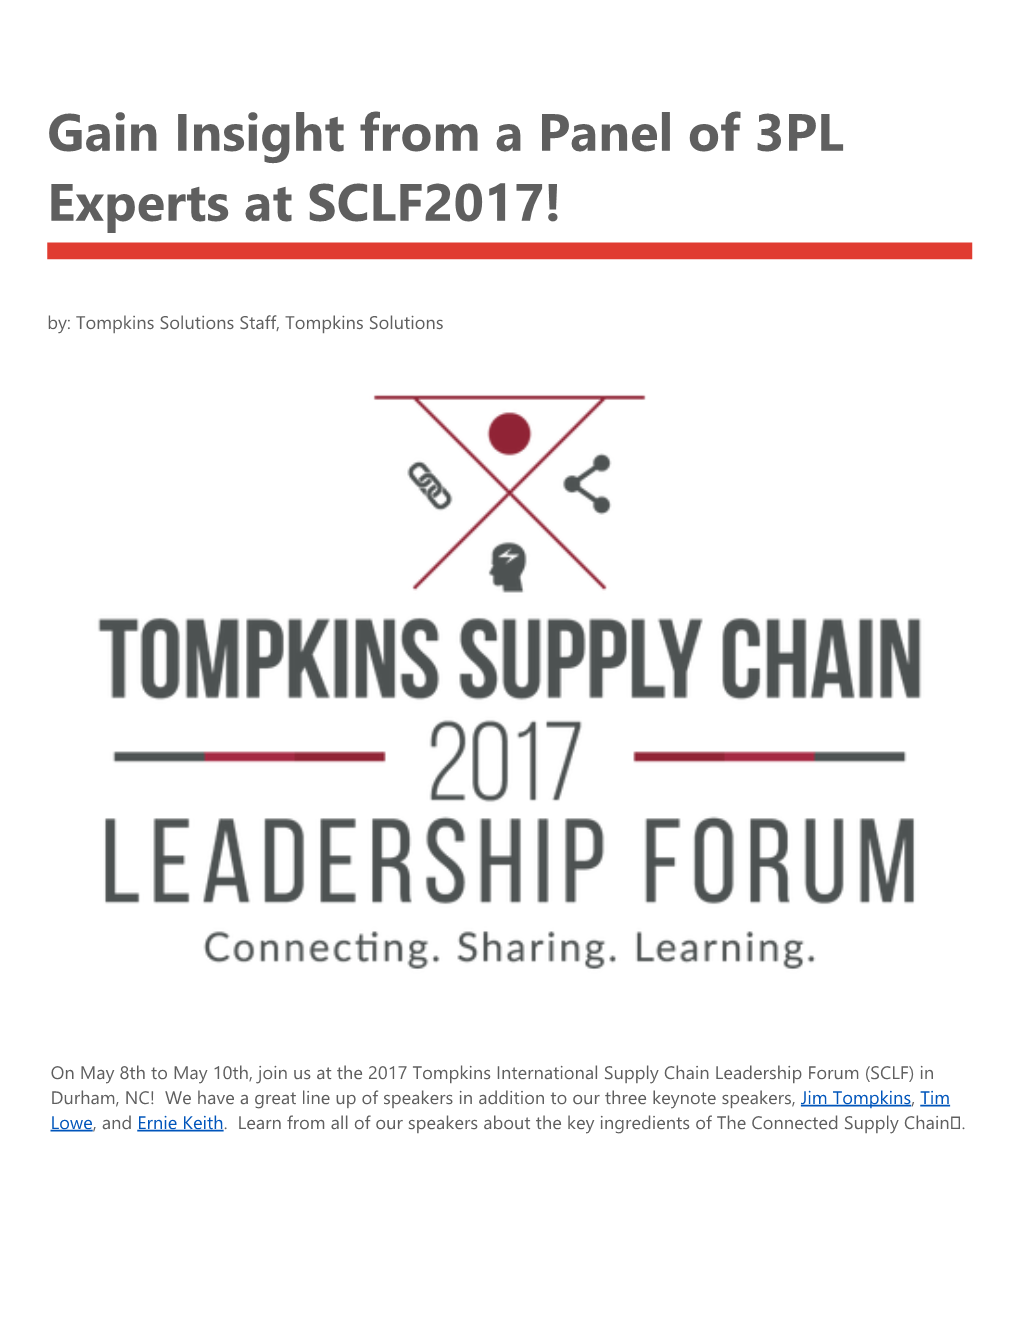 Gain Insight from a Panel of 3PL Experts at SCLF2017!